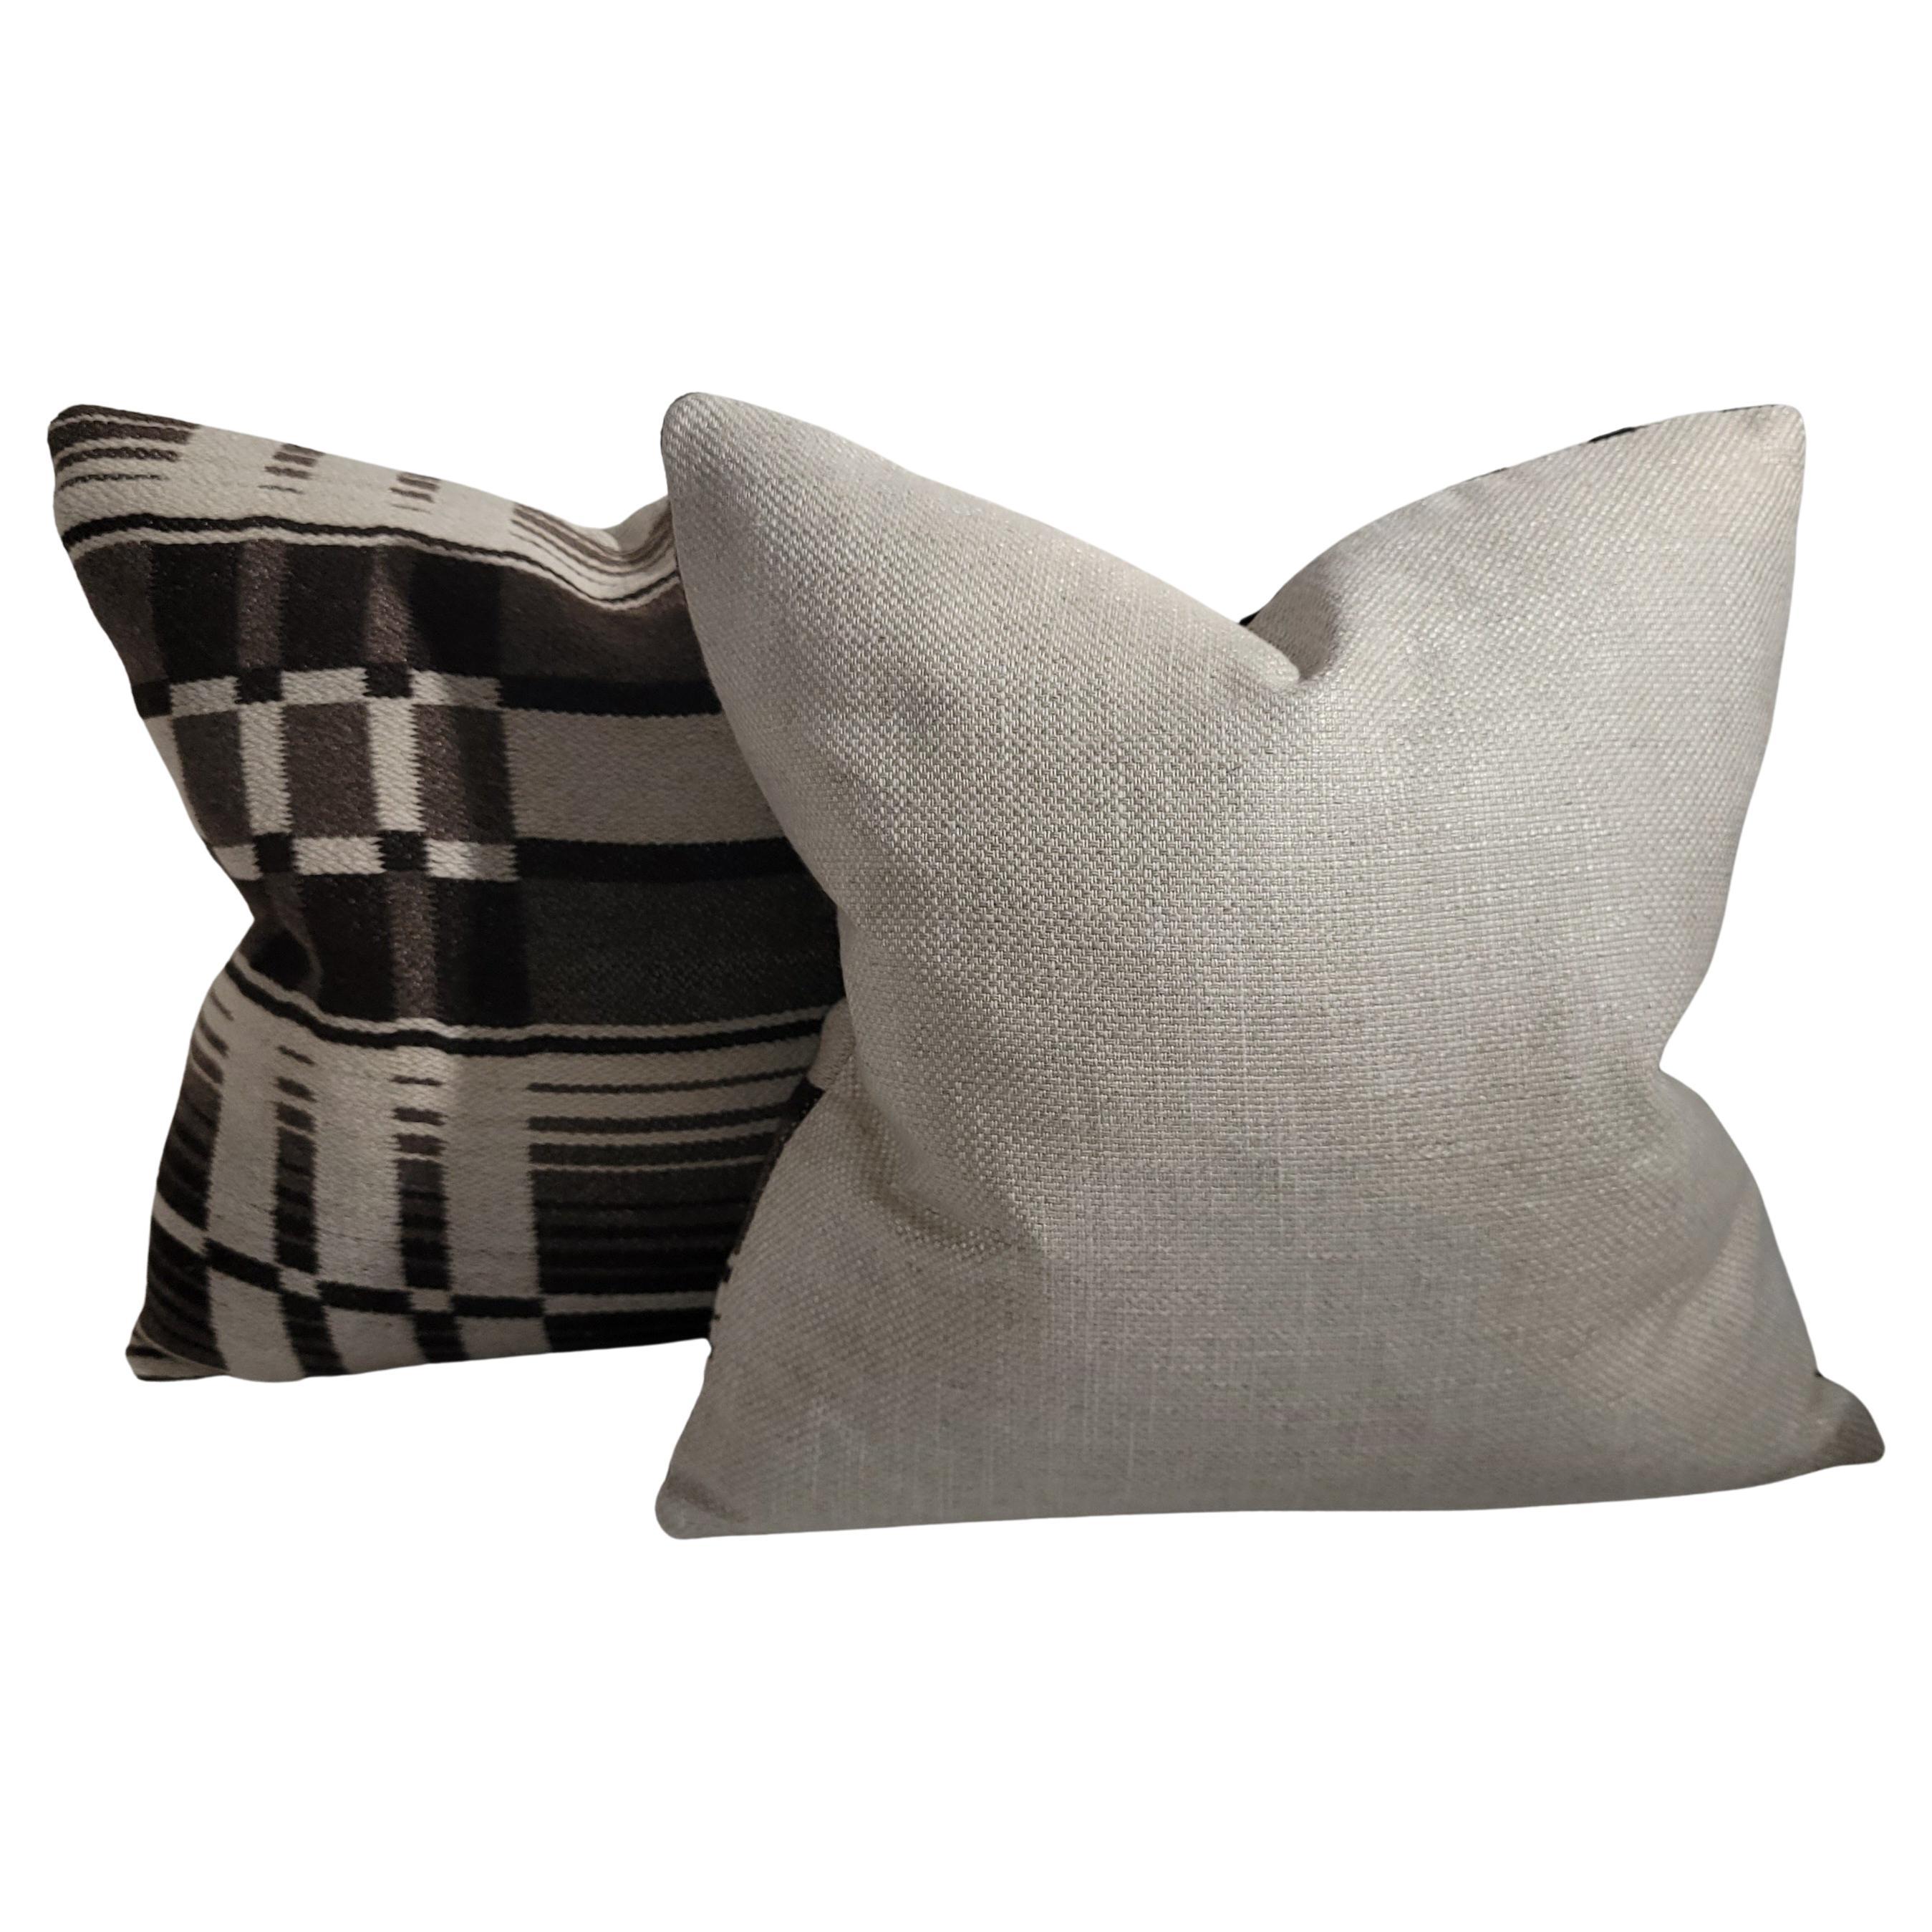 Pair of White and Browns wool plaid pillows. Beautiful design with intersecting striped throughout. The backing is made from a vintage linen fabric with down and feather custom inserts.